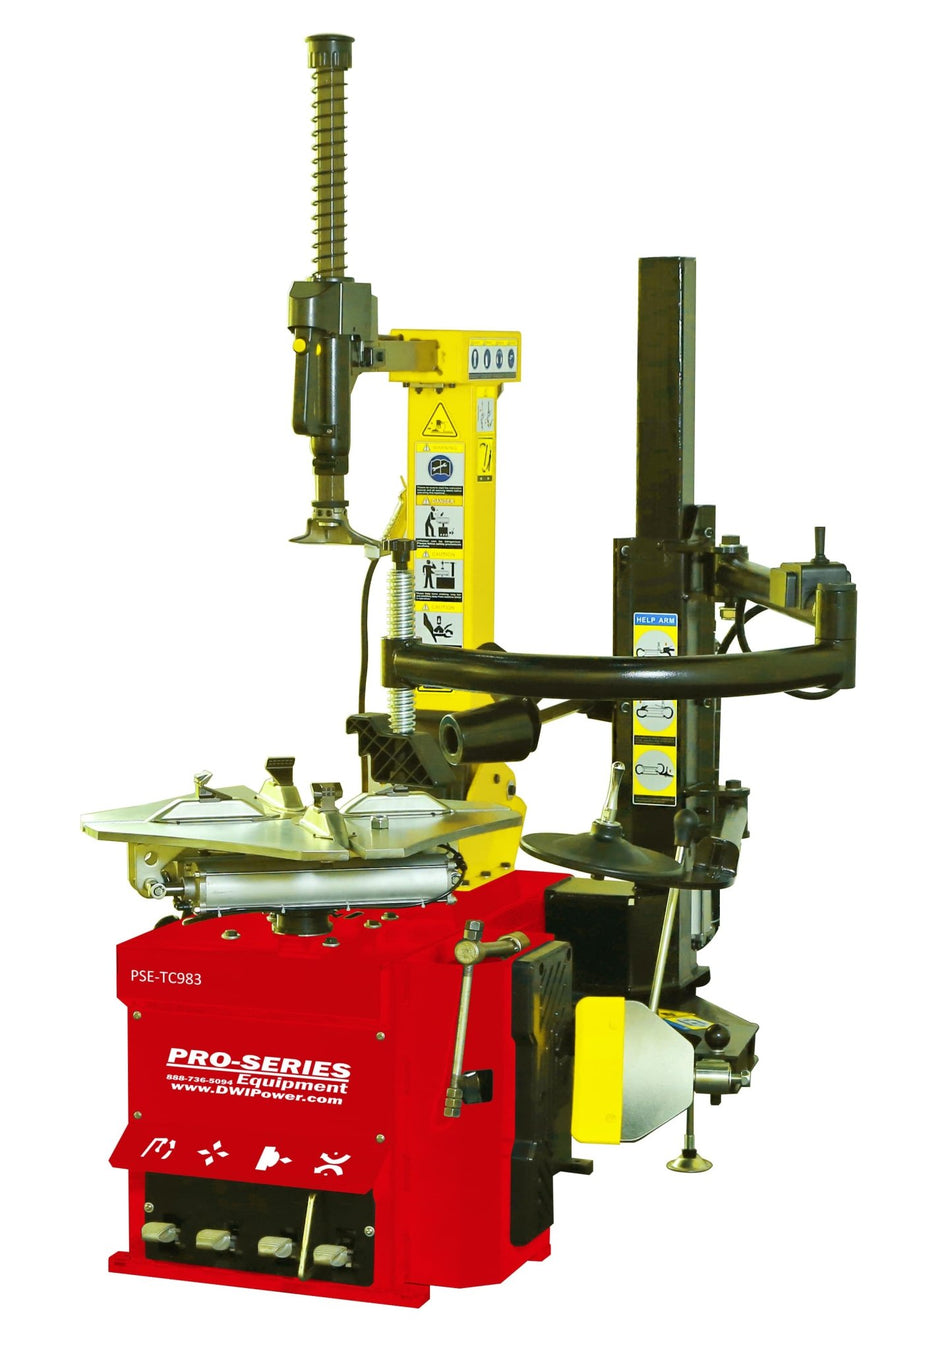 PSE-TC983 Bead Blast Tire Changer With Low Profile Tire Arm - Pro-Series Equipment ( Store Password is 1 )